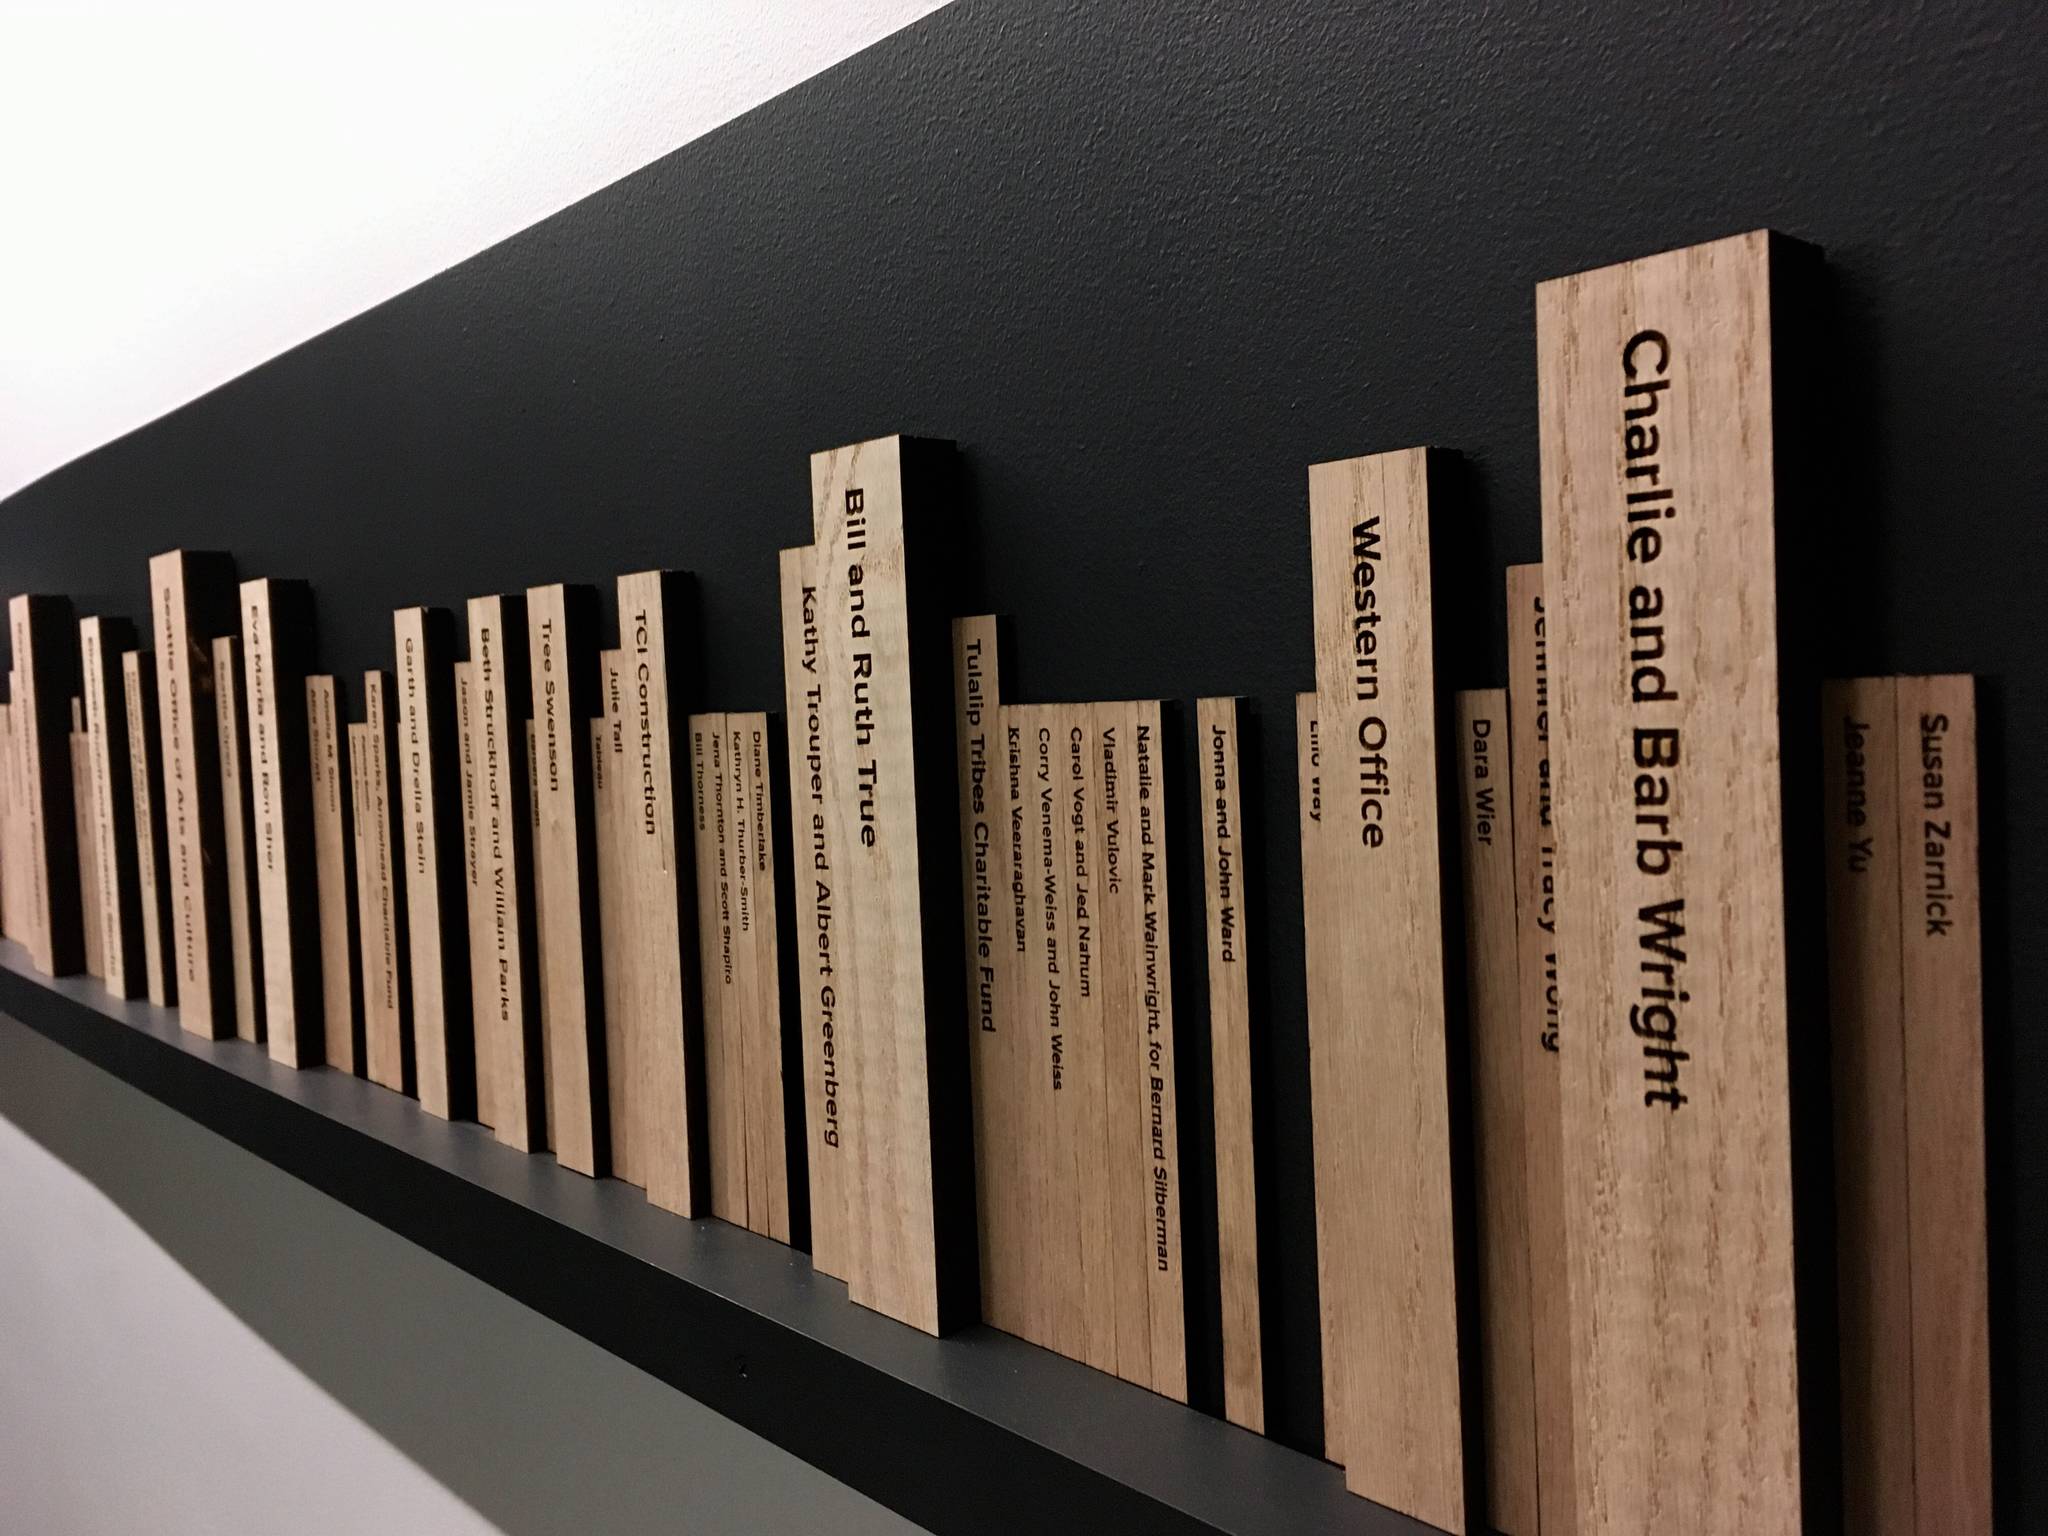 Donor books spines line the walls of the new Hugo House. Photo by Seth Sommerfeld